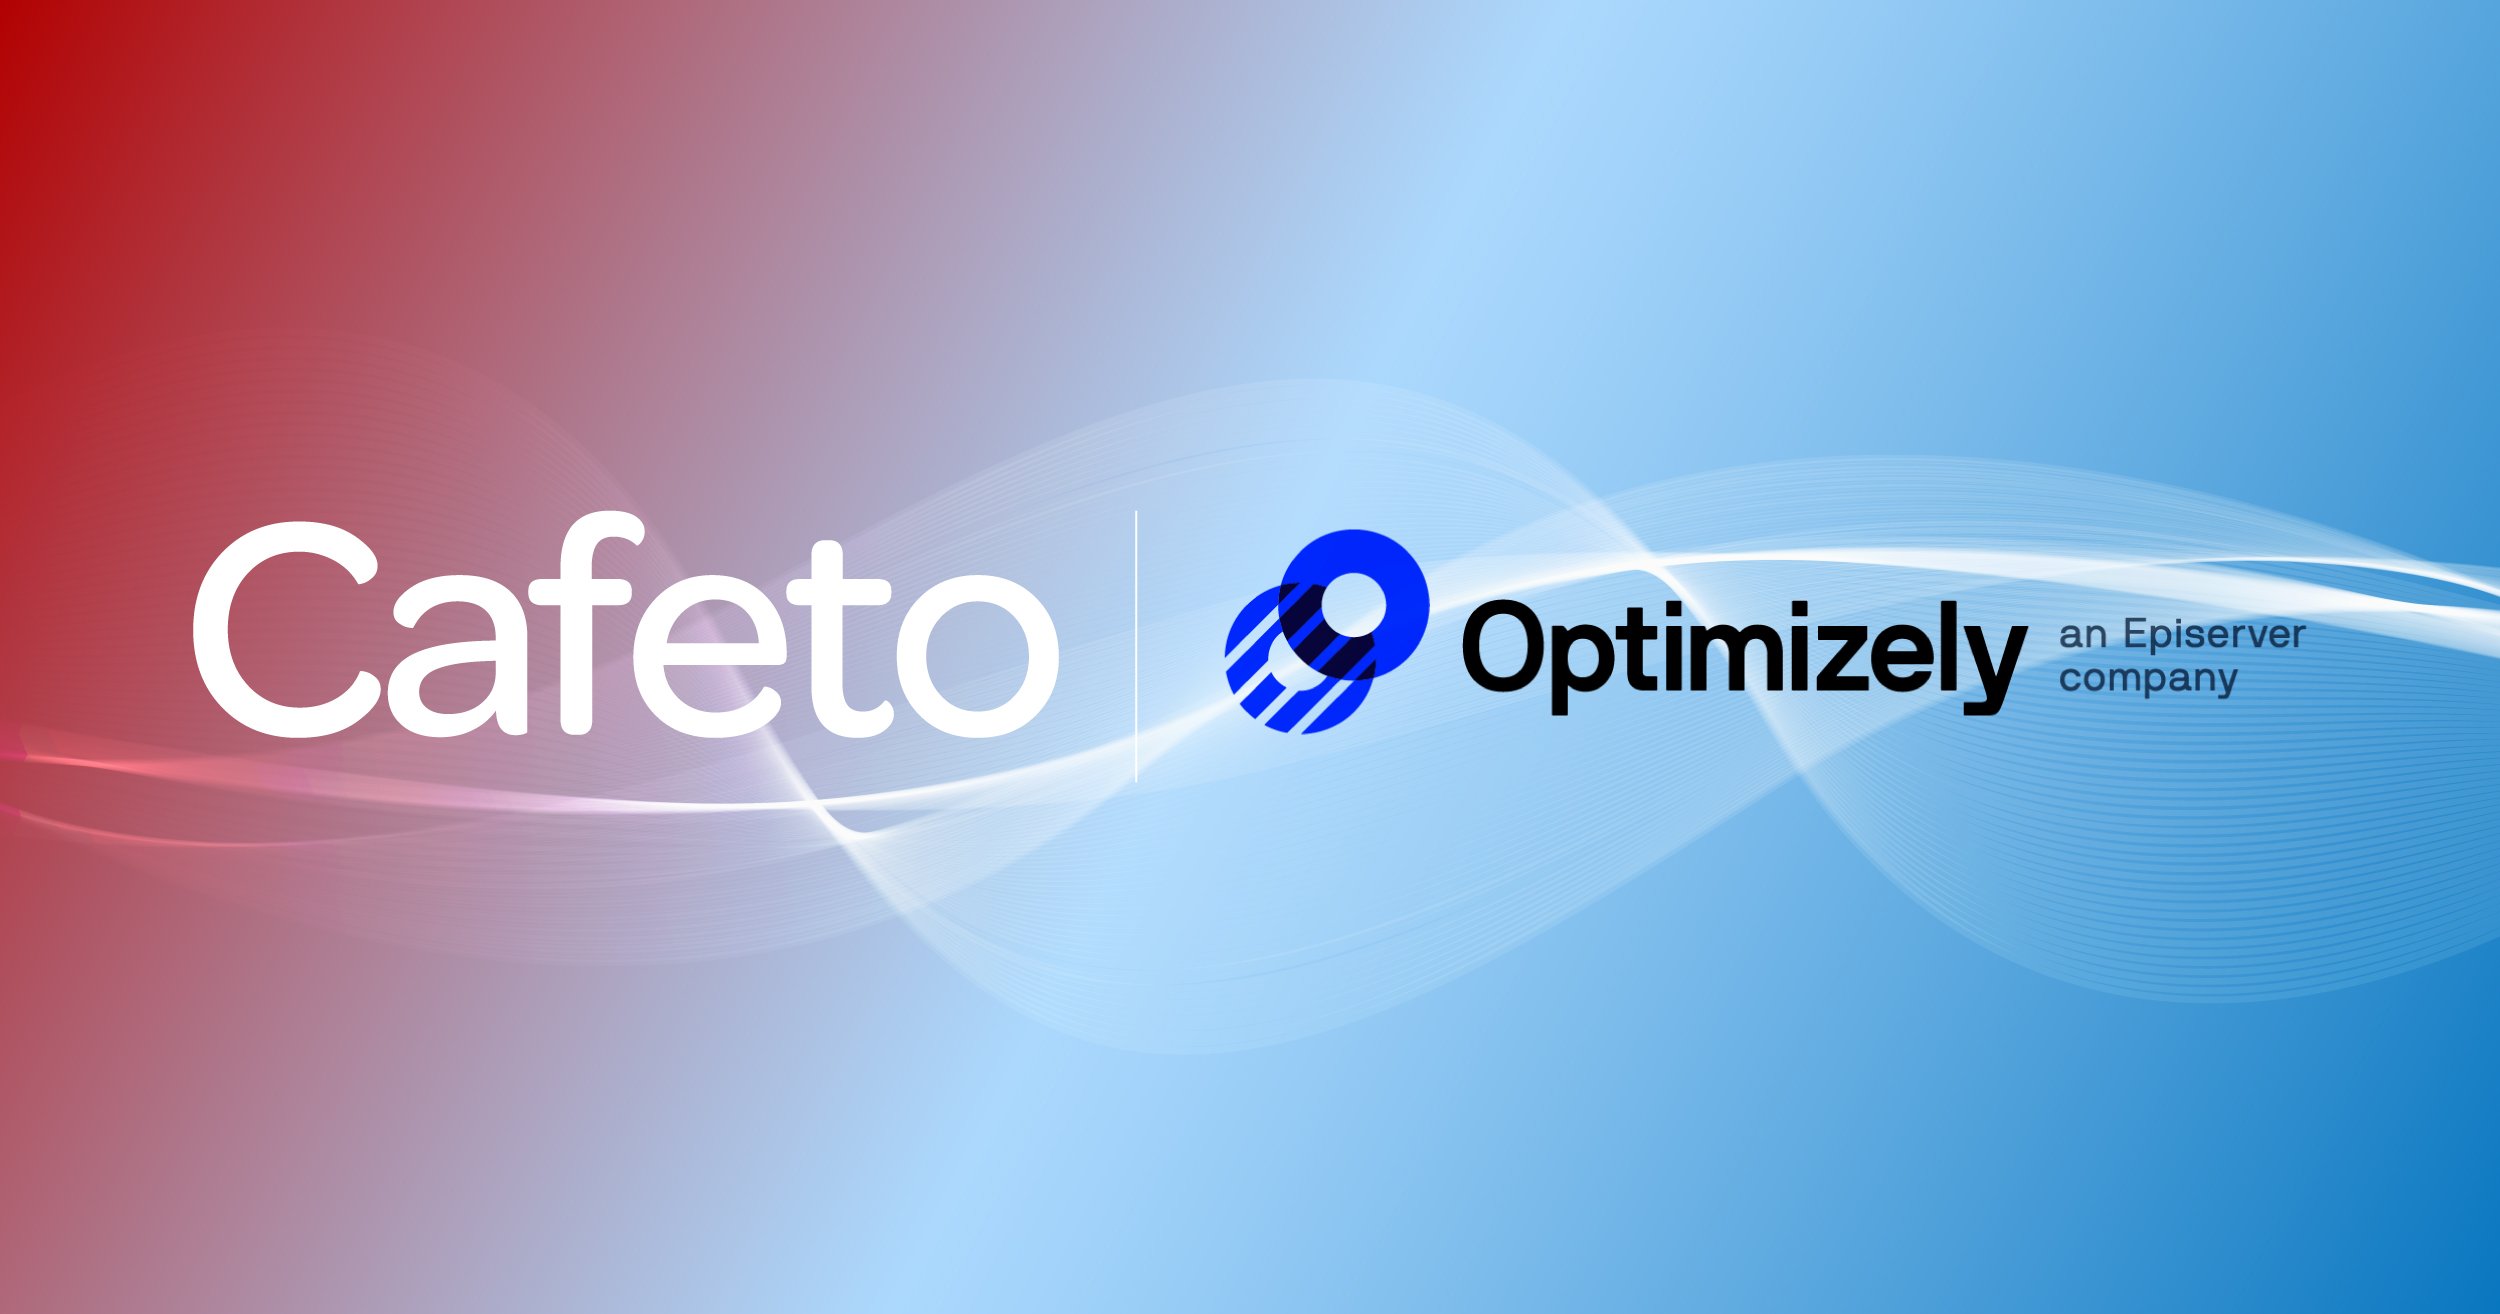 Cafeto announces its new partnership with Optimizely.